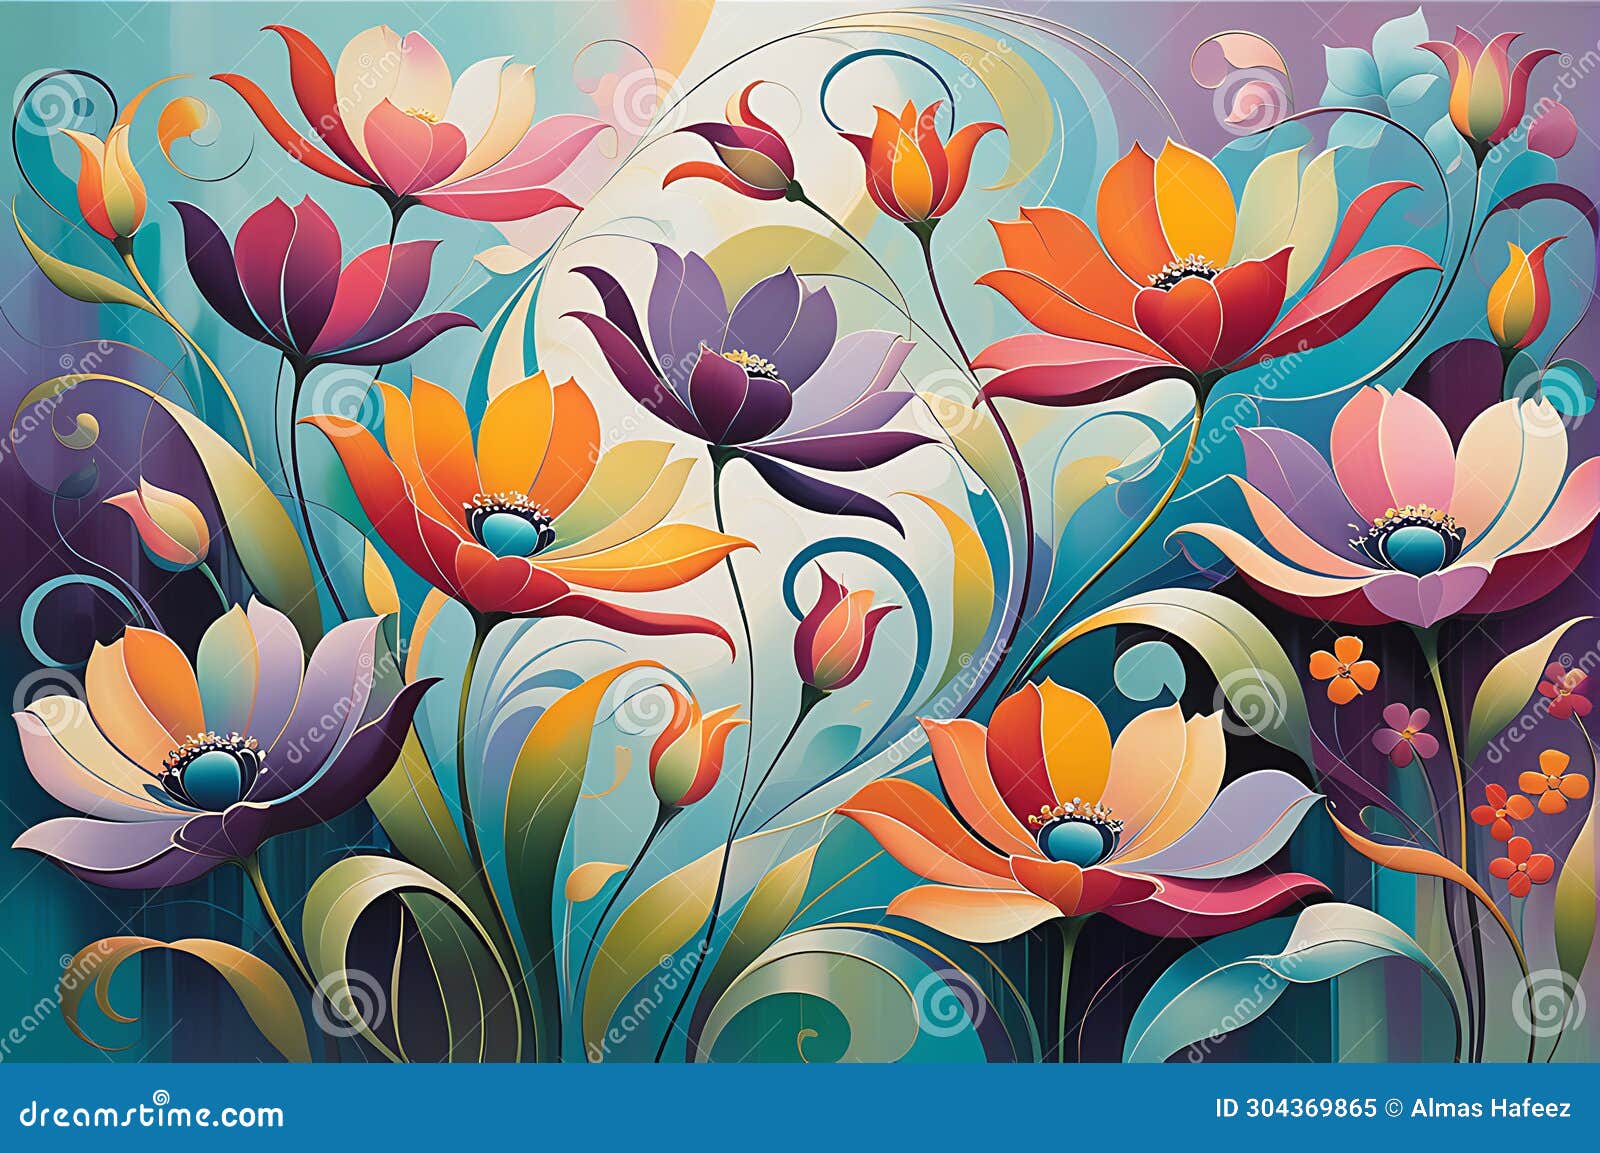 abstract painting - focus on a myriad of flowers in undefined s, blending into a cohesive background